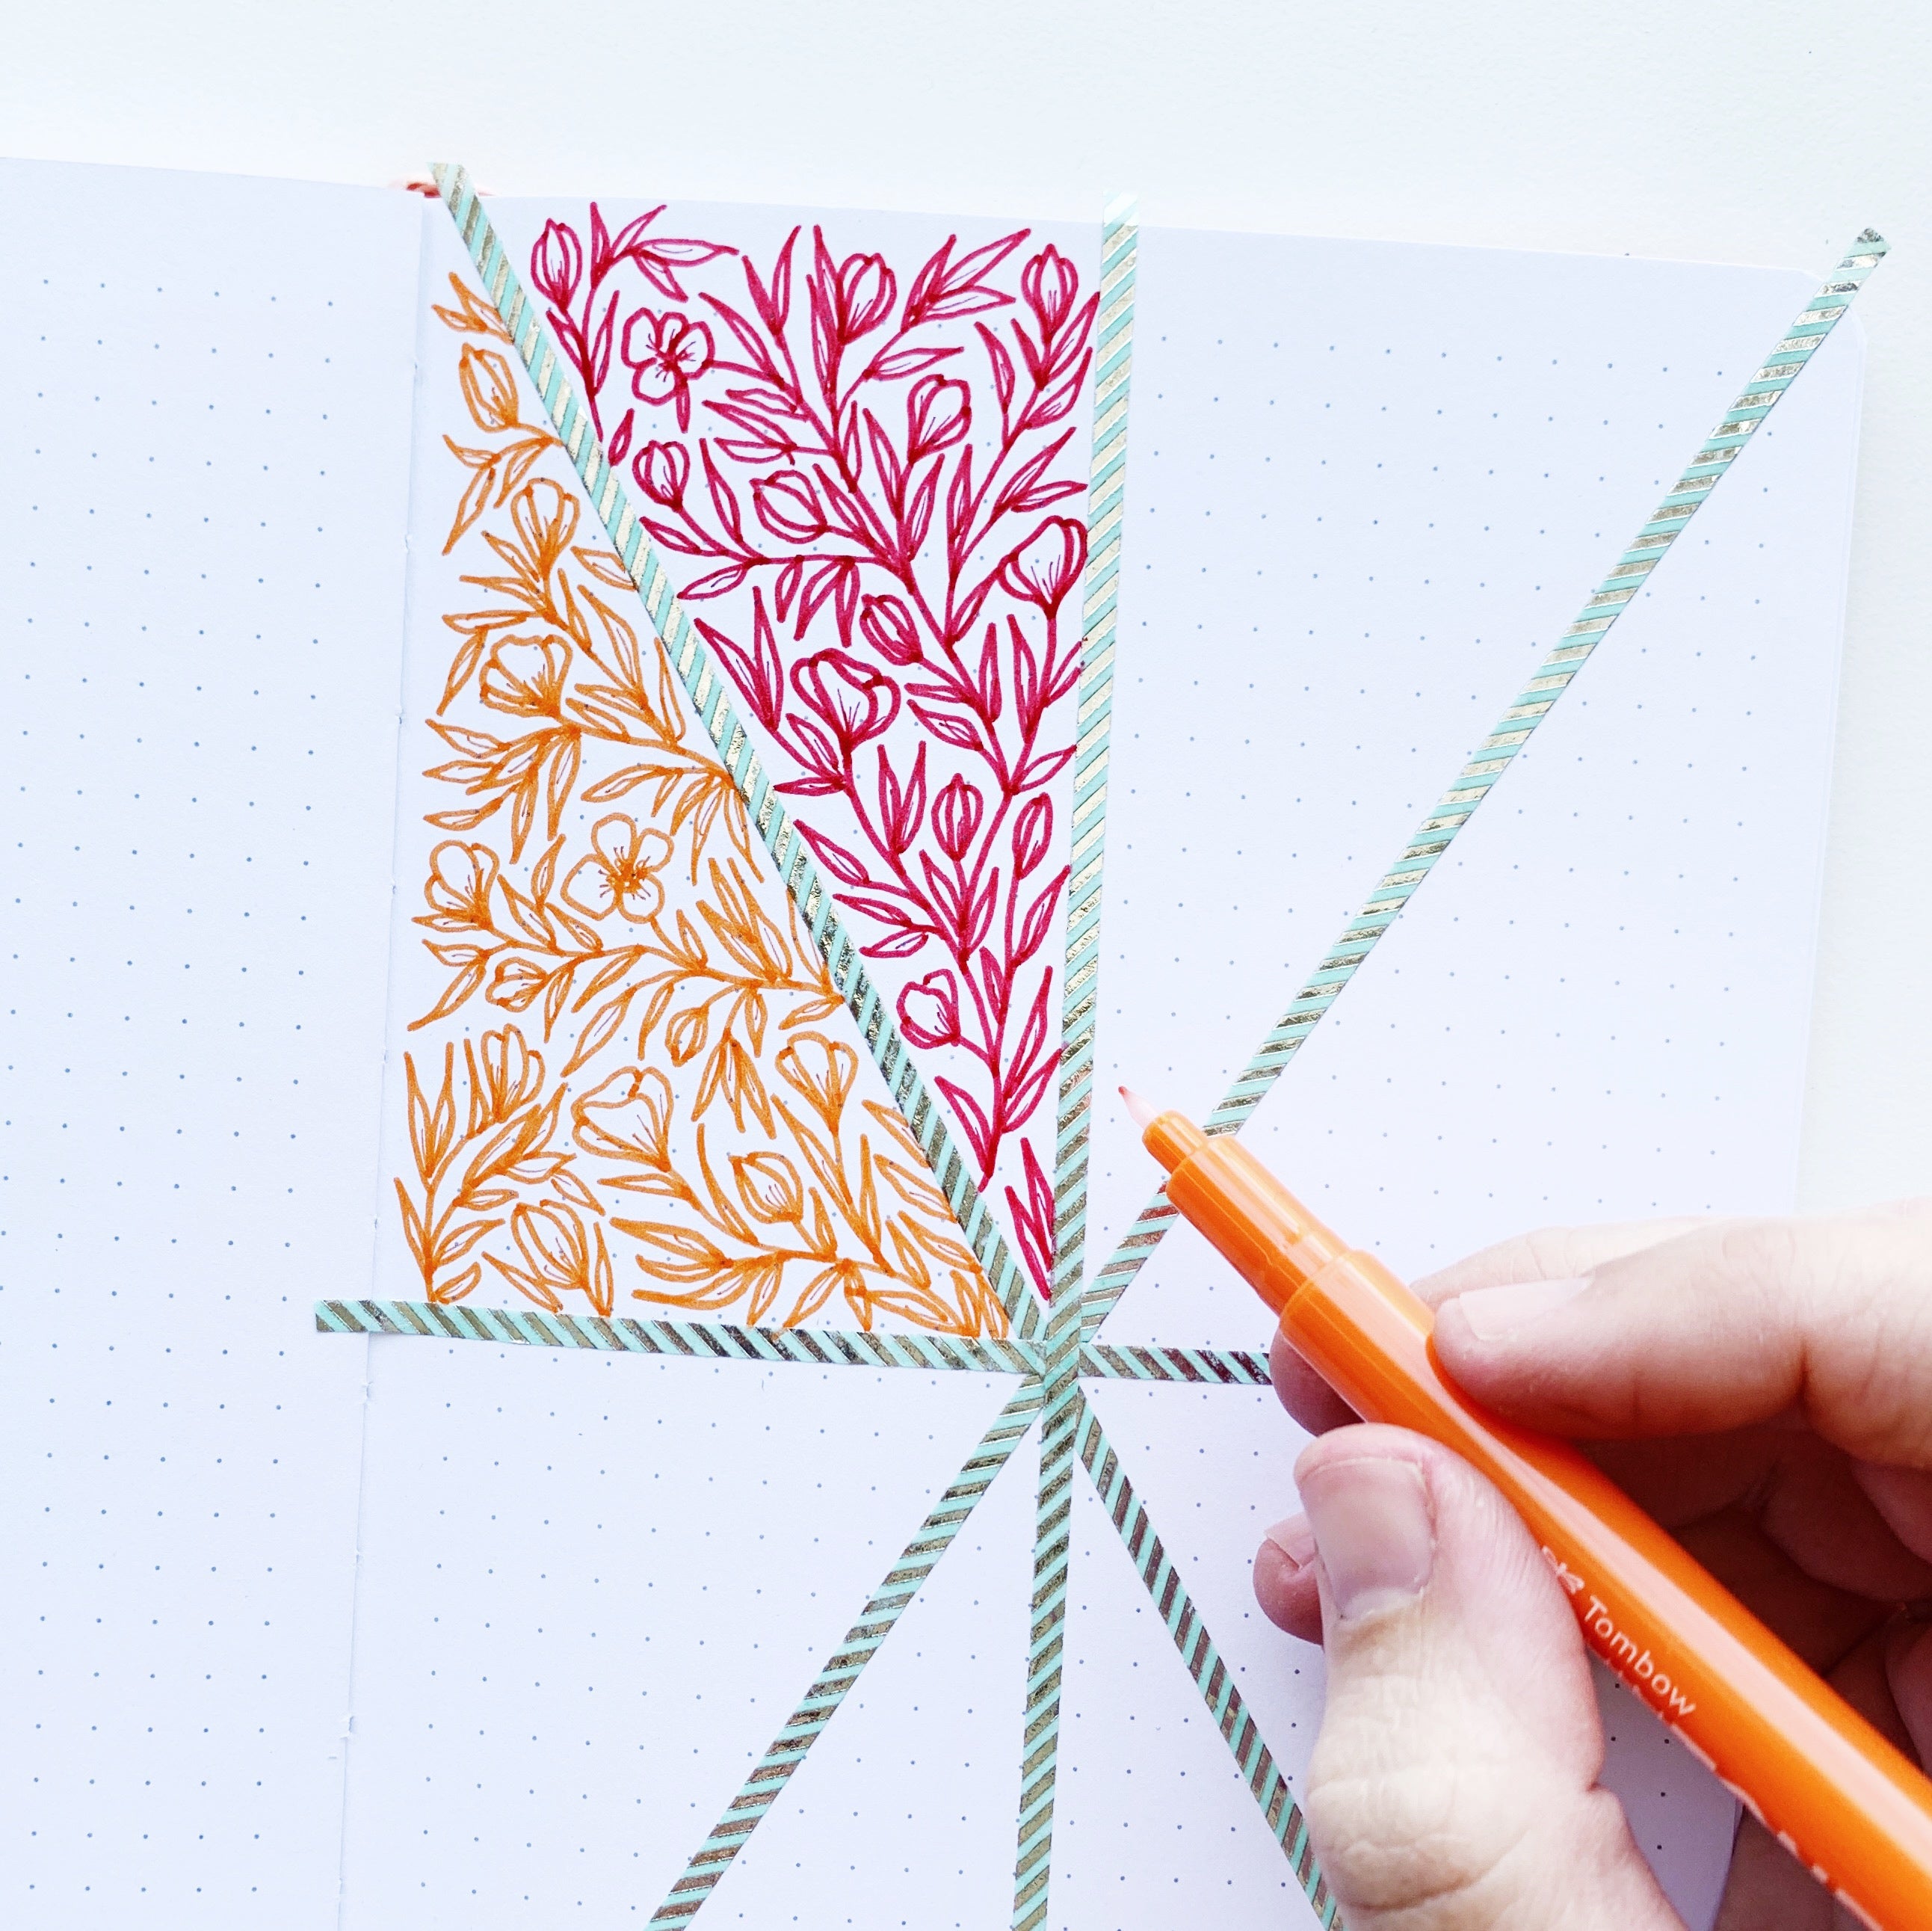 Learn how to create a geometric floral page using Washi tape with Adrienne from @studio80desgin!